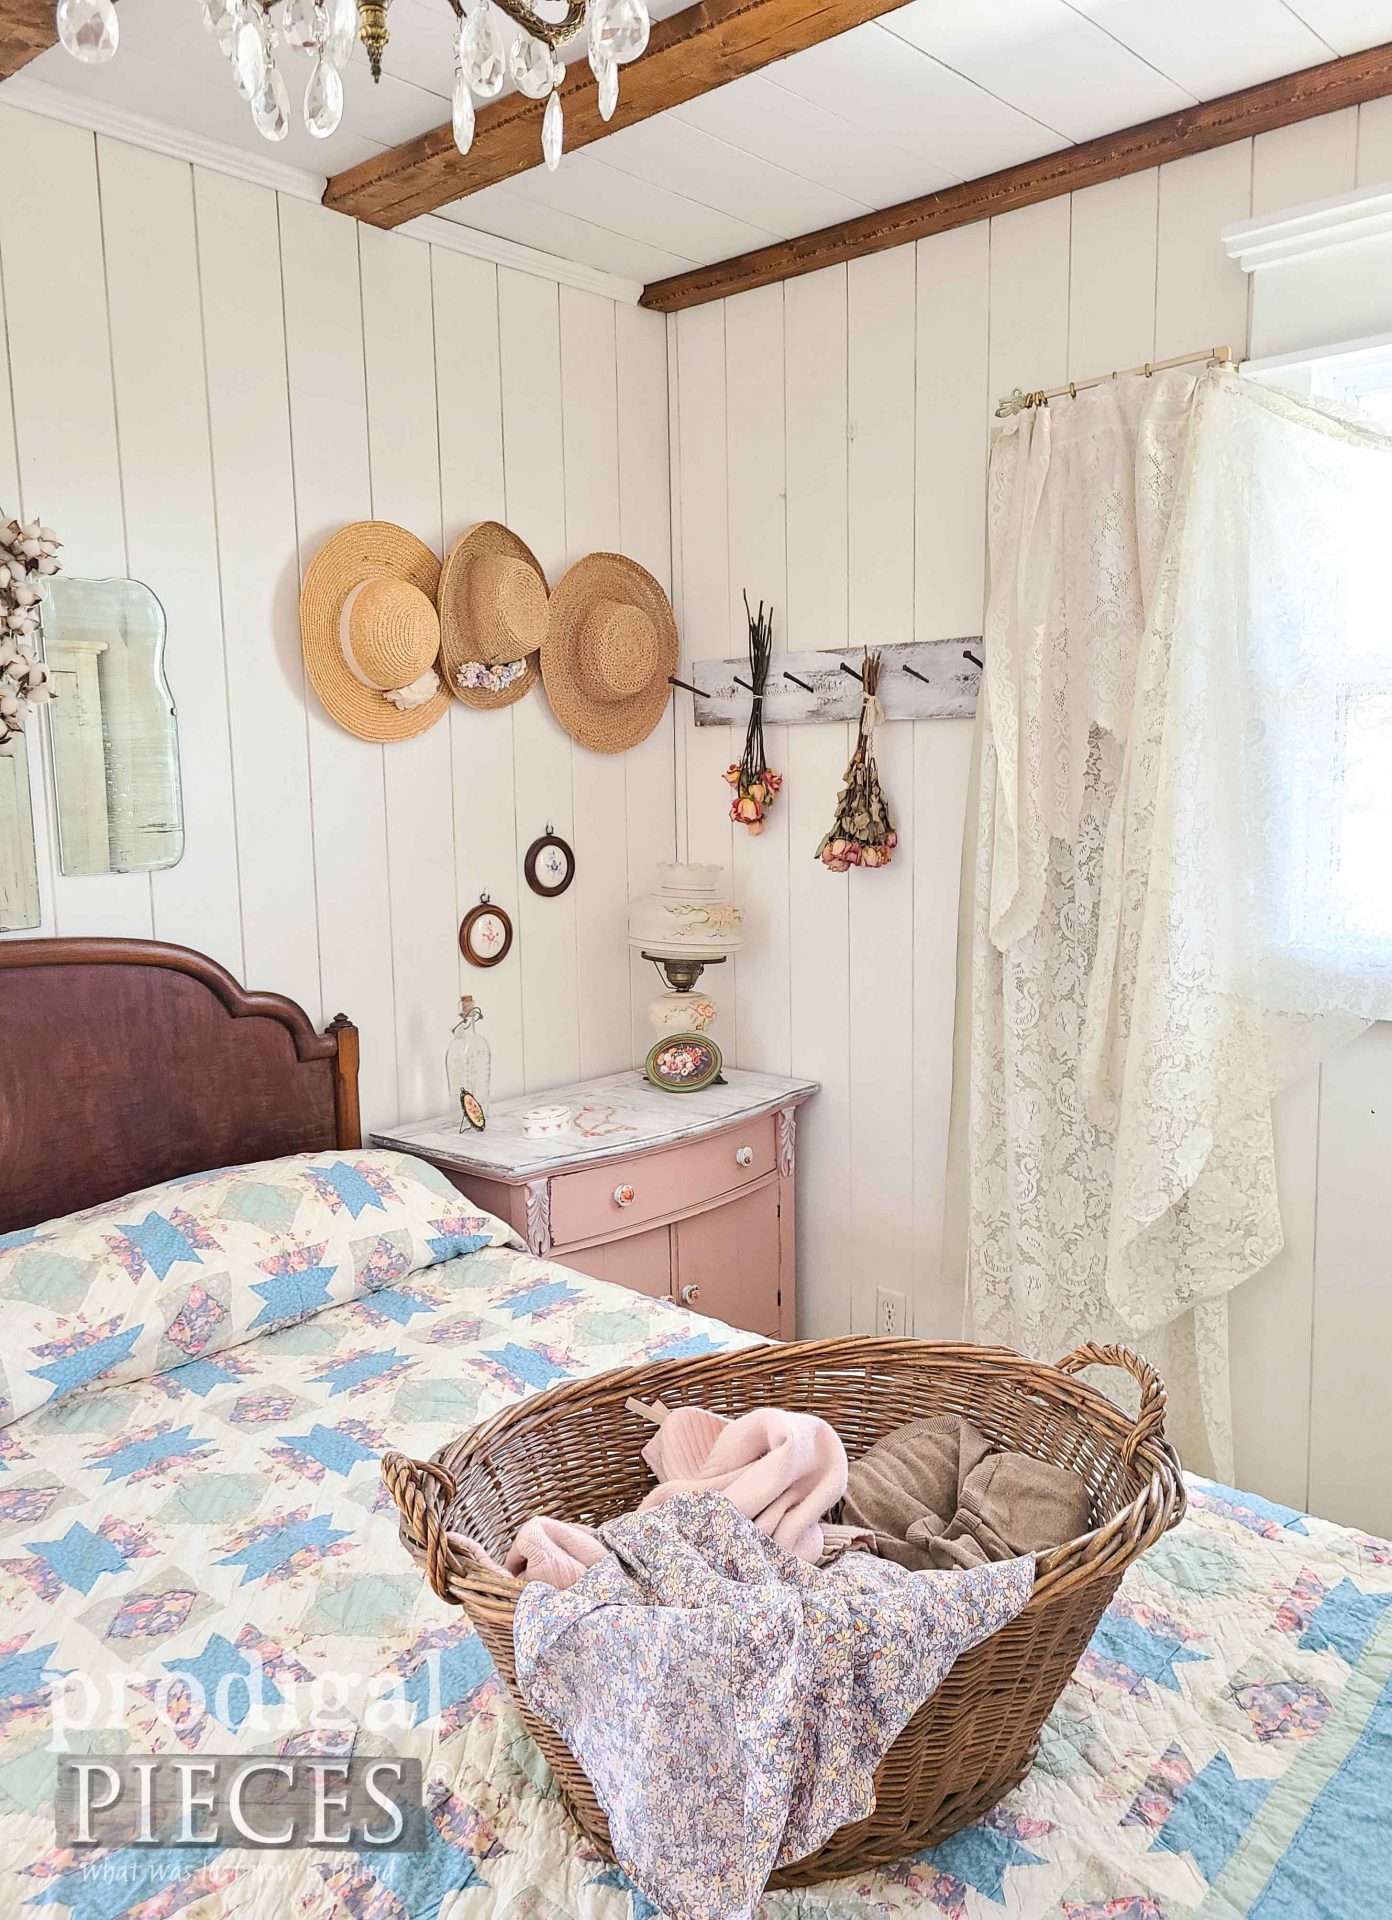 Farmhouse Cottage Bedroom by Larissa of Prodigal Pieces | prodigalpieces.com #prodigalpieces #farmhouse #cottage #shabbychic #bedroom